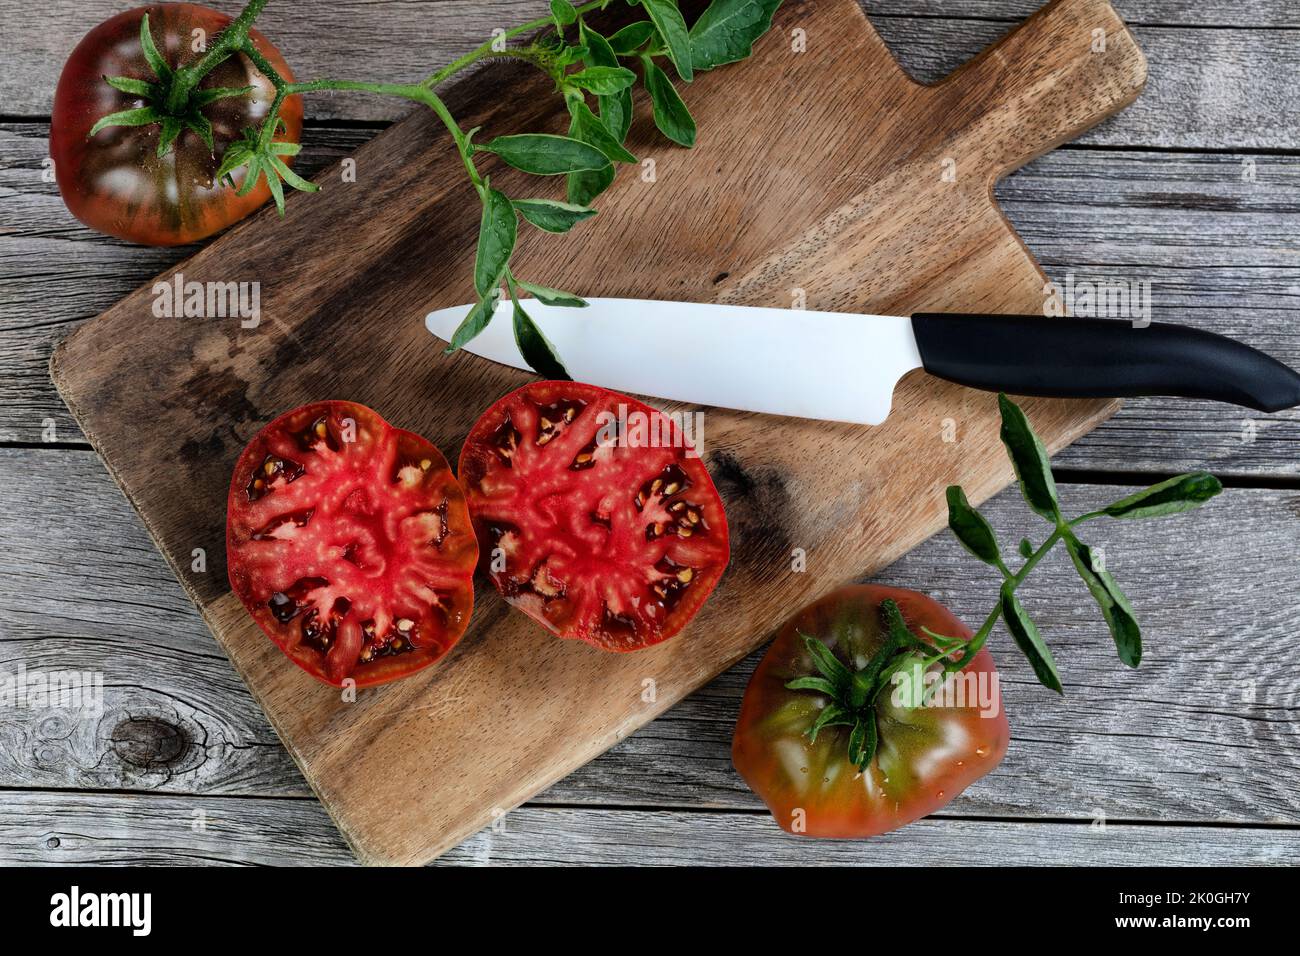 Ripe organic tomato sliced in half with cutting ceramic knife plus server on rustic wood table in flat lay format Stock Photo